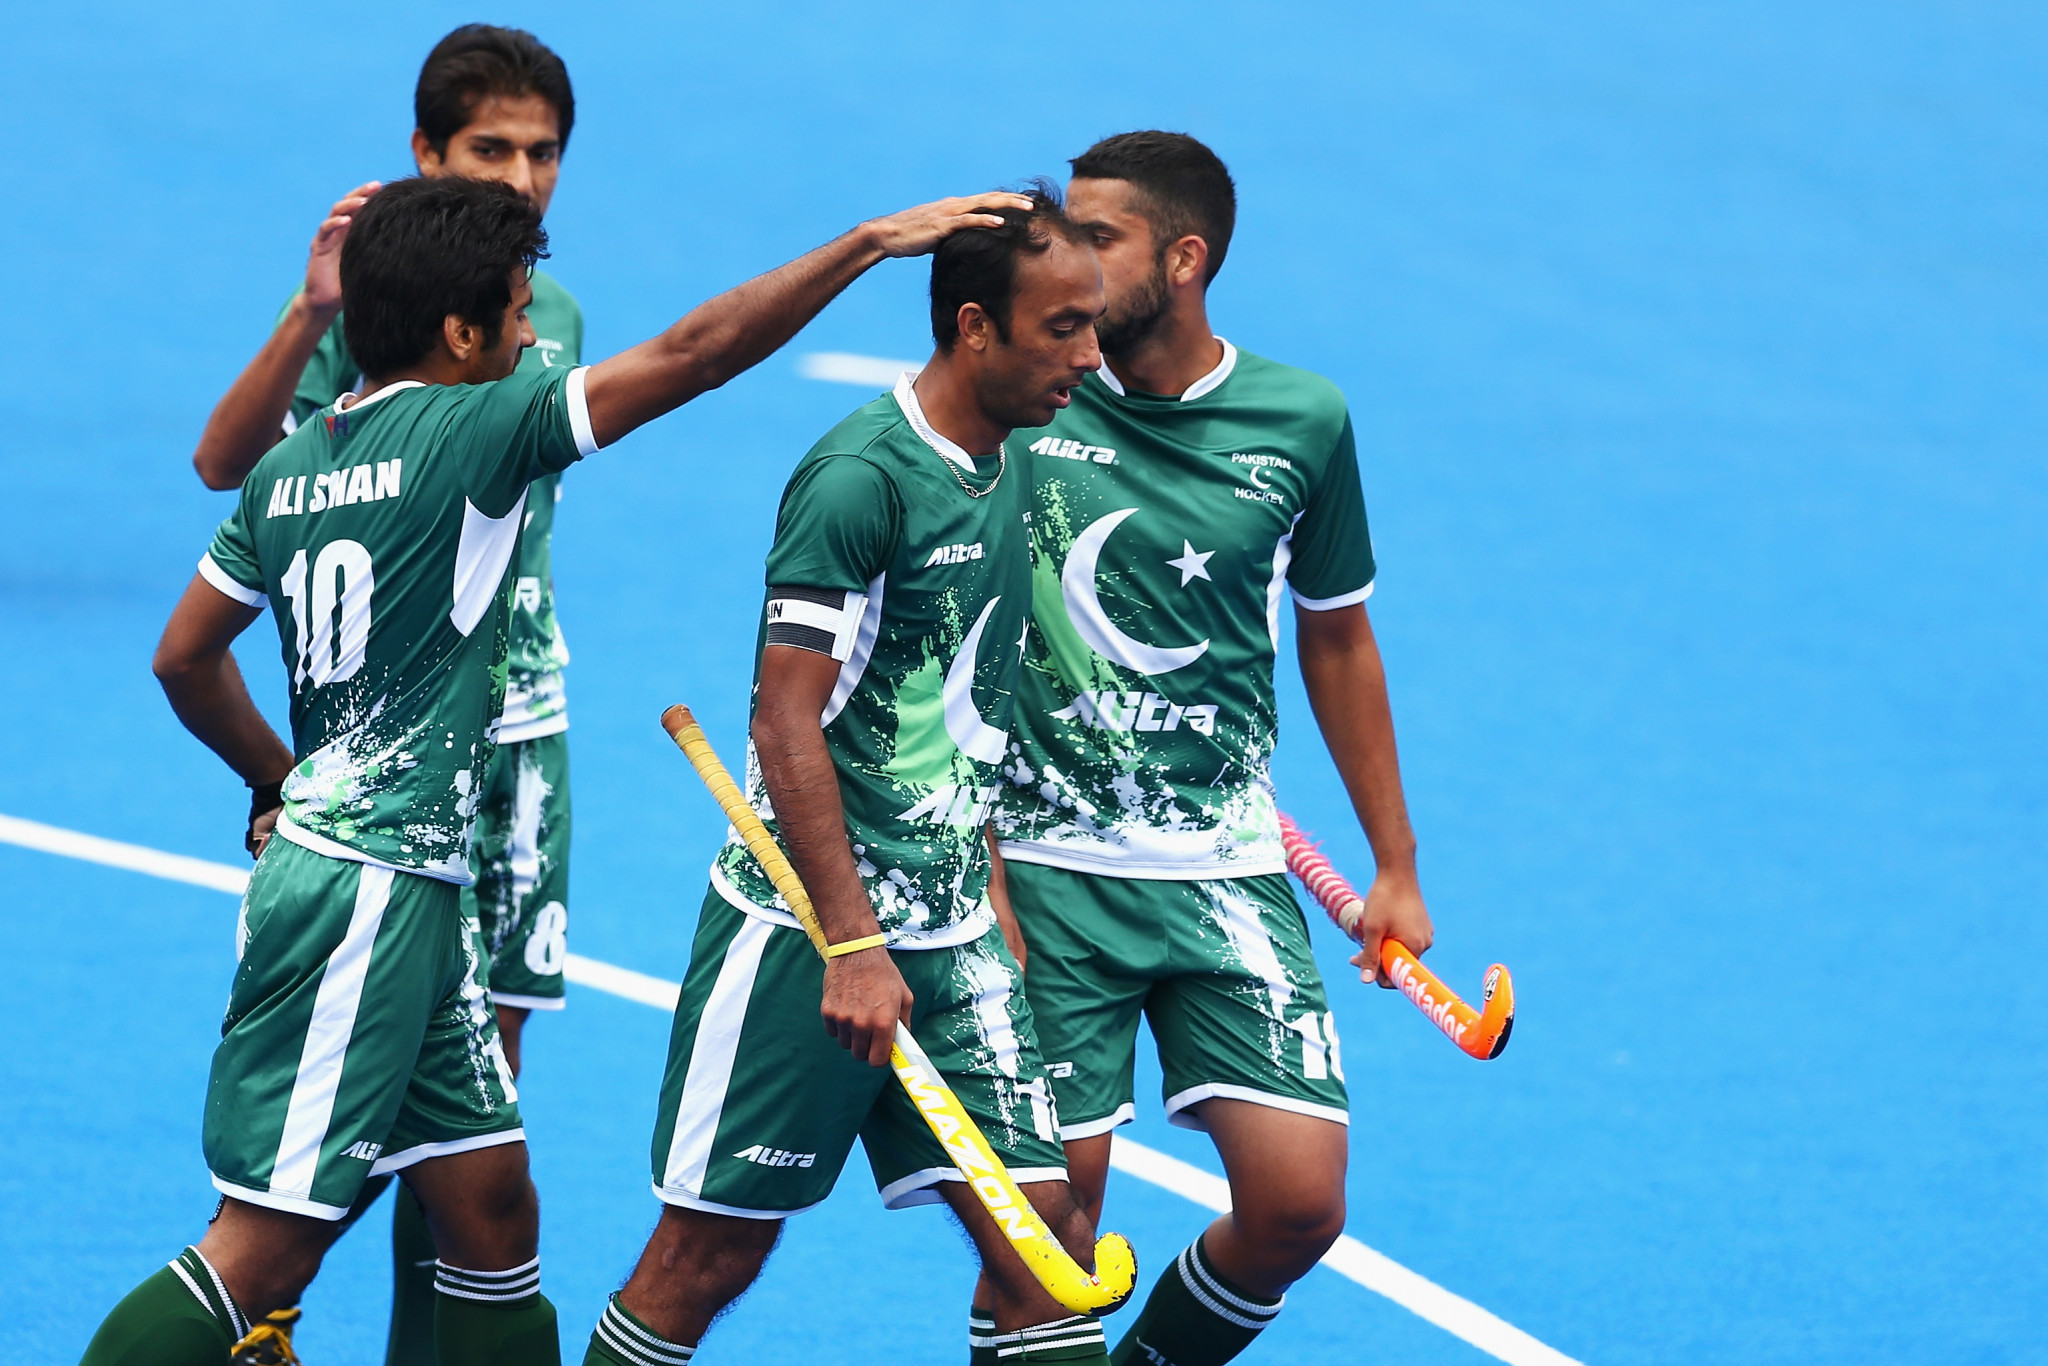 Pakistan will travel to India for the upcoming Hockey World Cup despite political tensions between the two countries ©Getty Images